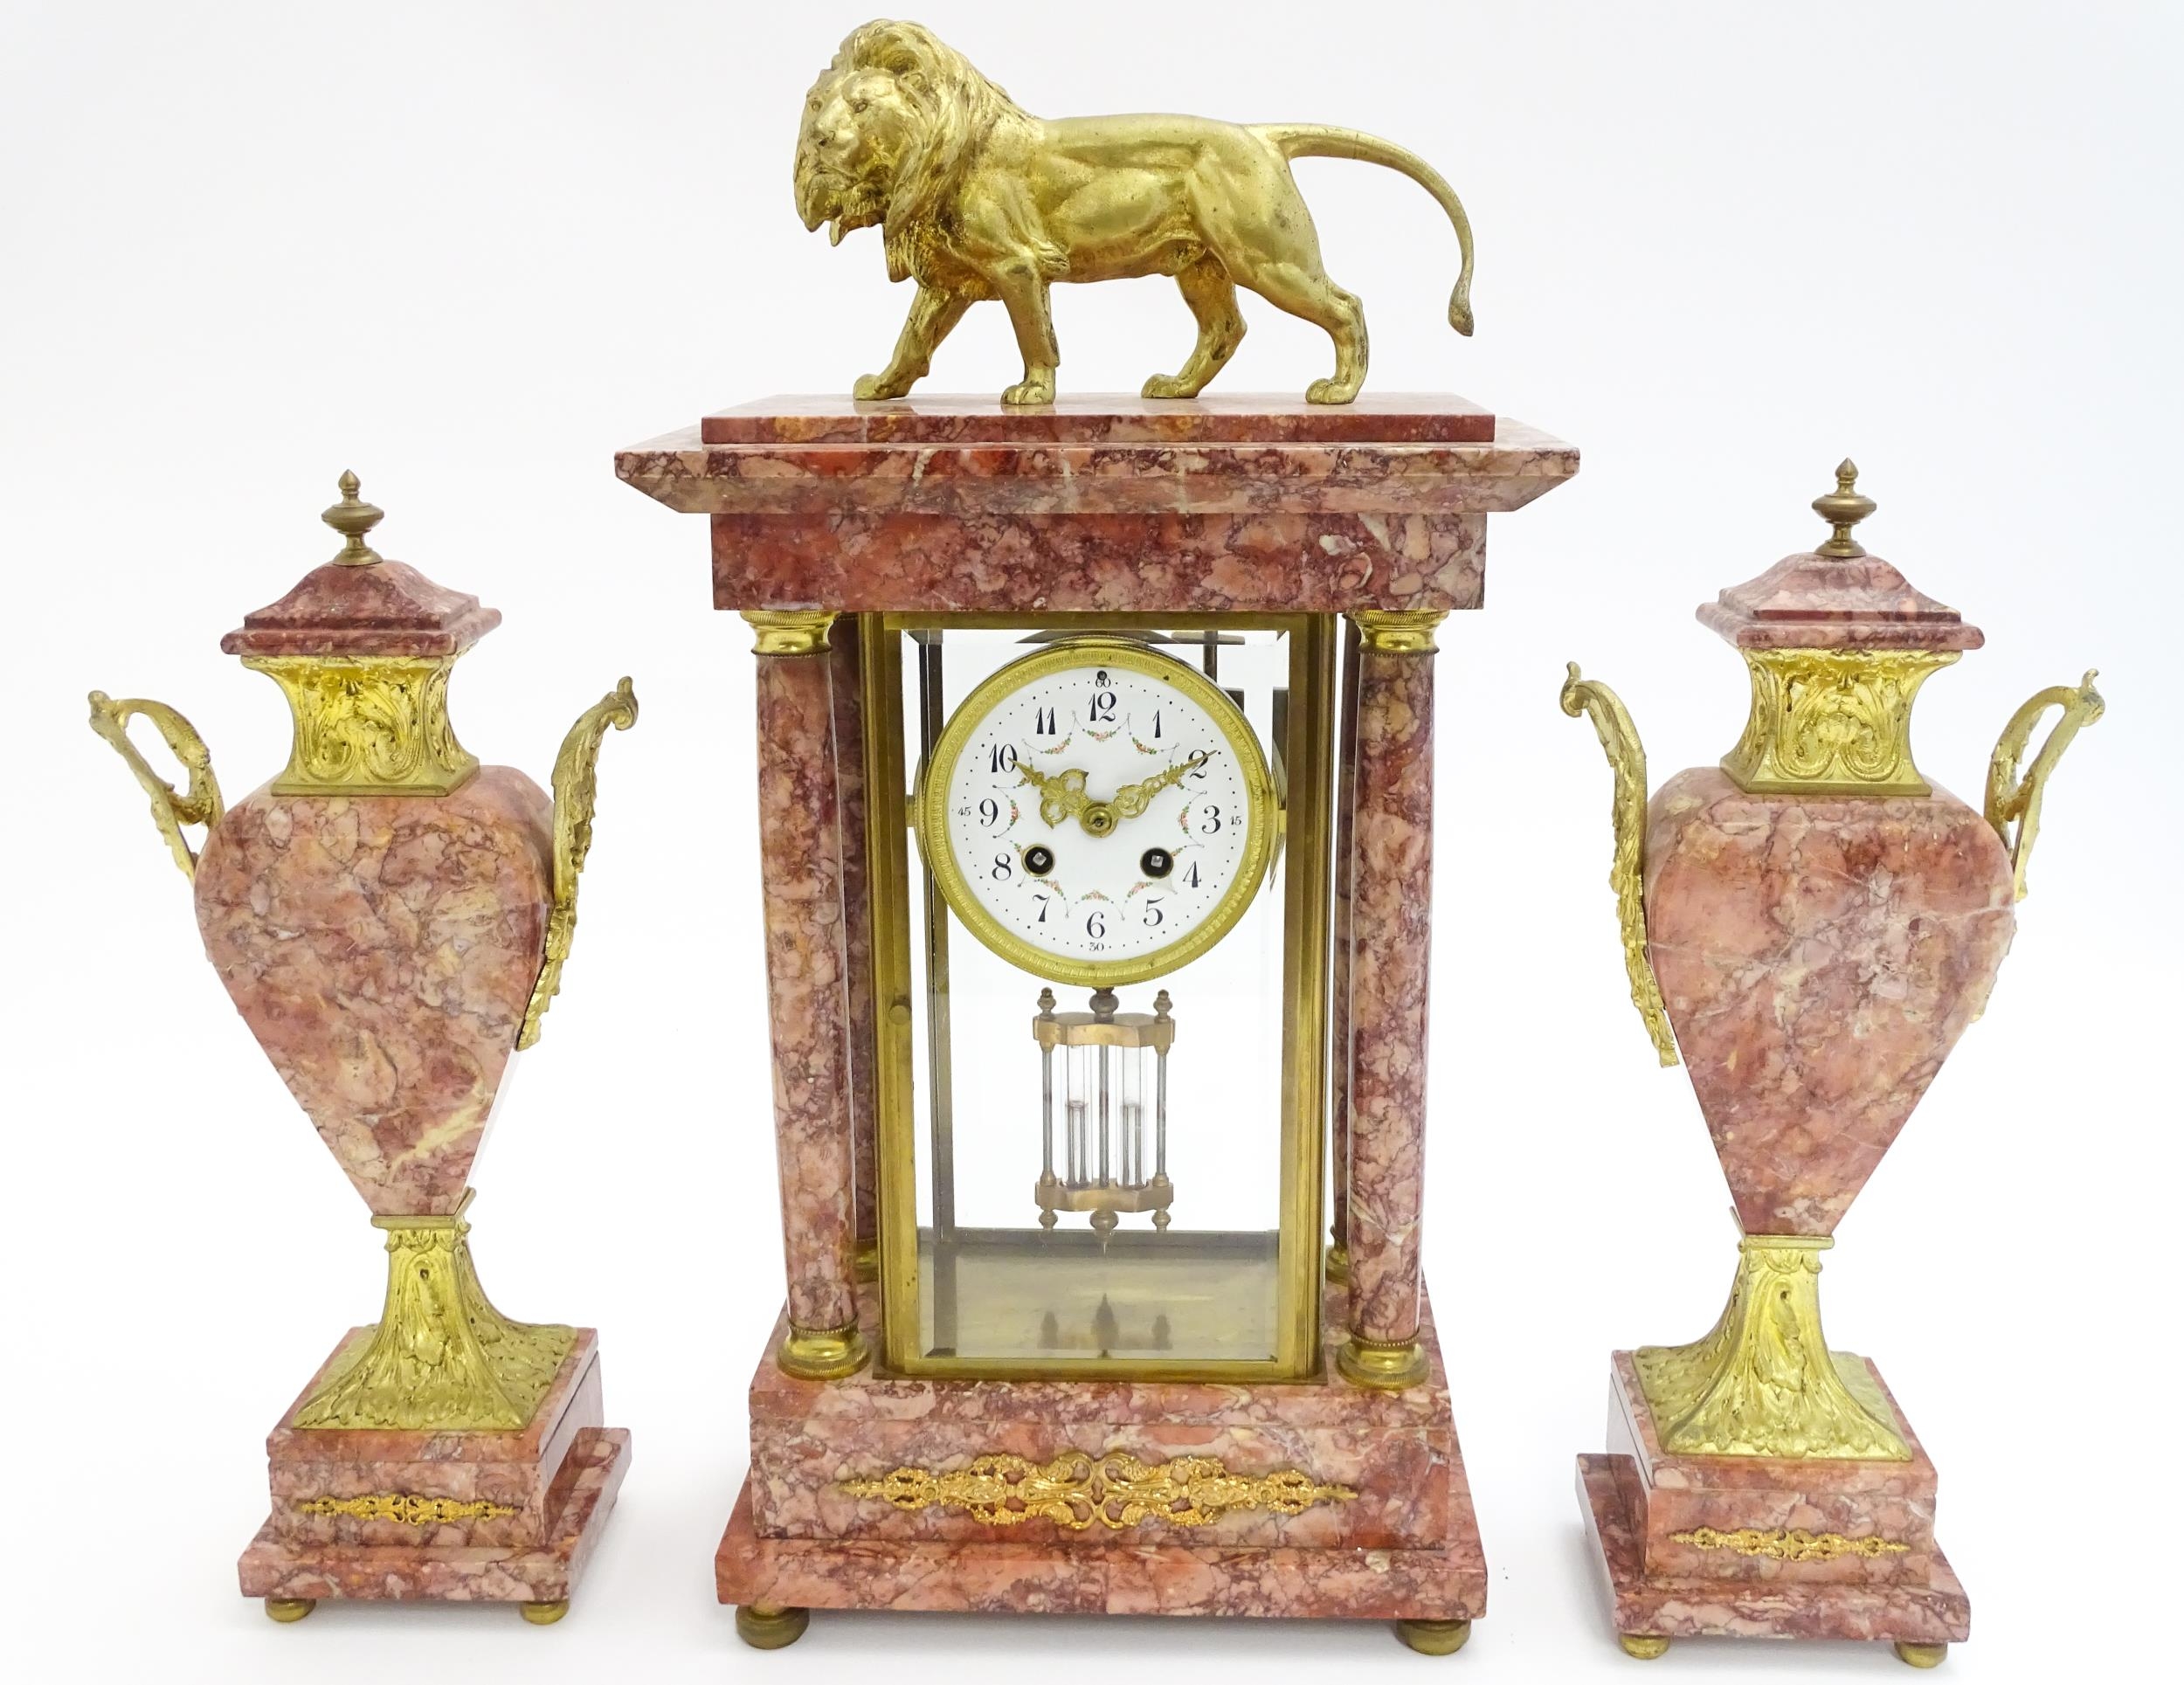 A 19thC French Three-Piece Clock Garniture, by Marti, having a white dial with floral garland swags,